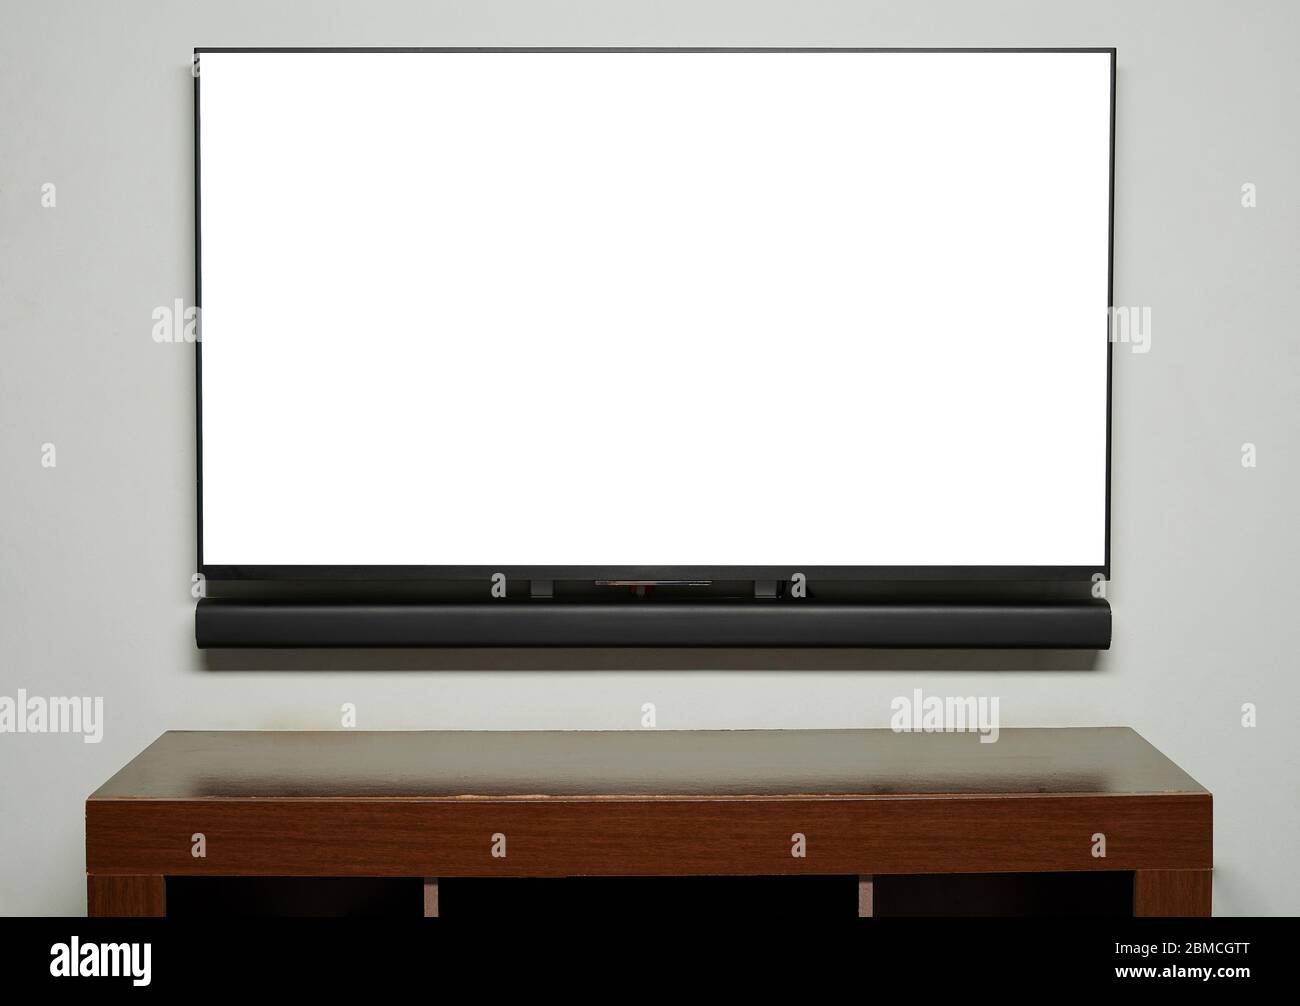 Big tv screen hang on wall with empty wooden table Stock Photo - Alamy